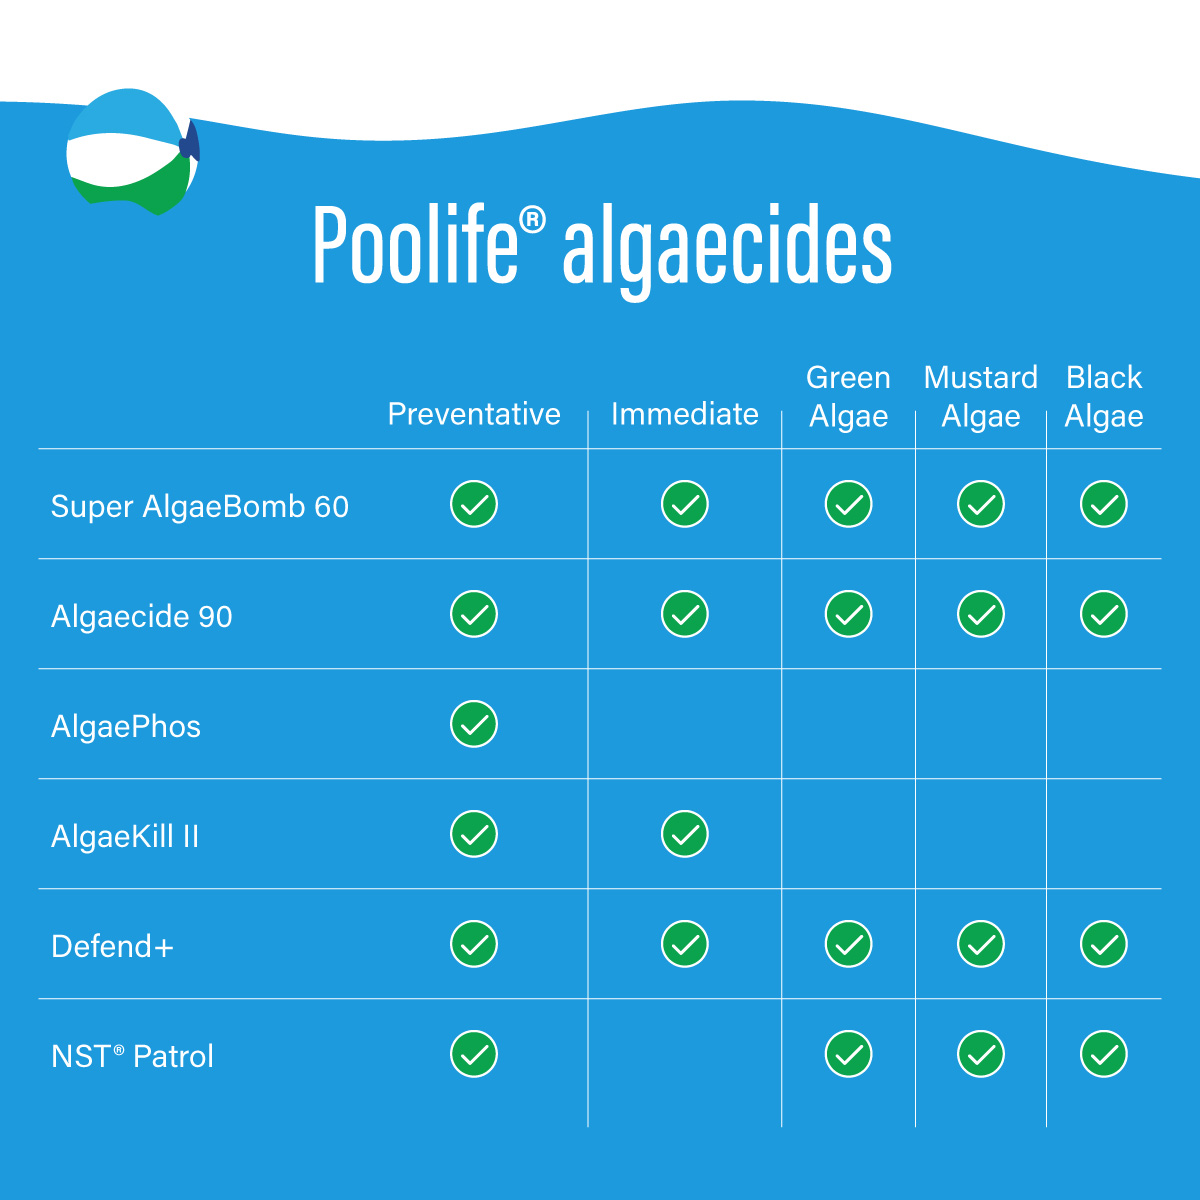 Poolife algaecides chart showing a check for this product: Preventative